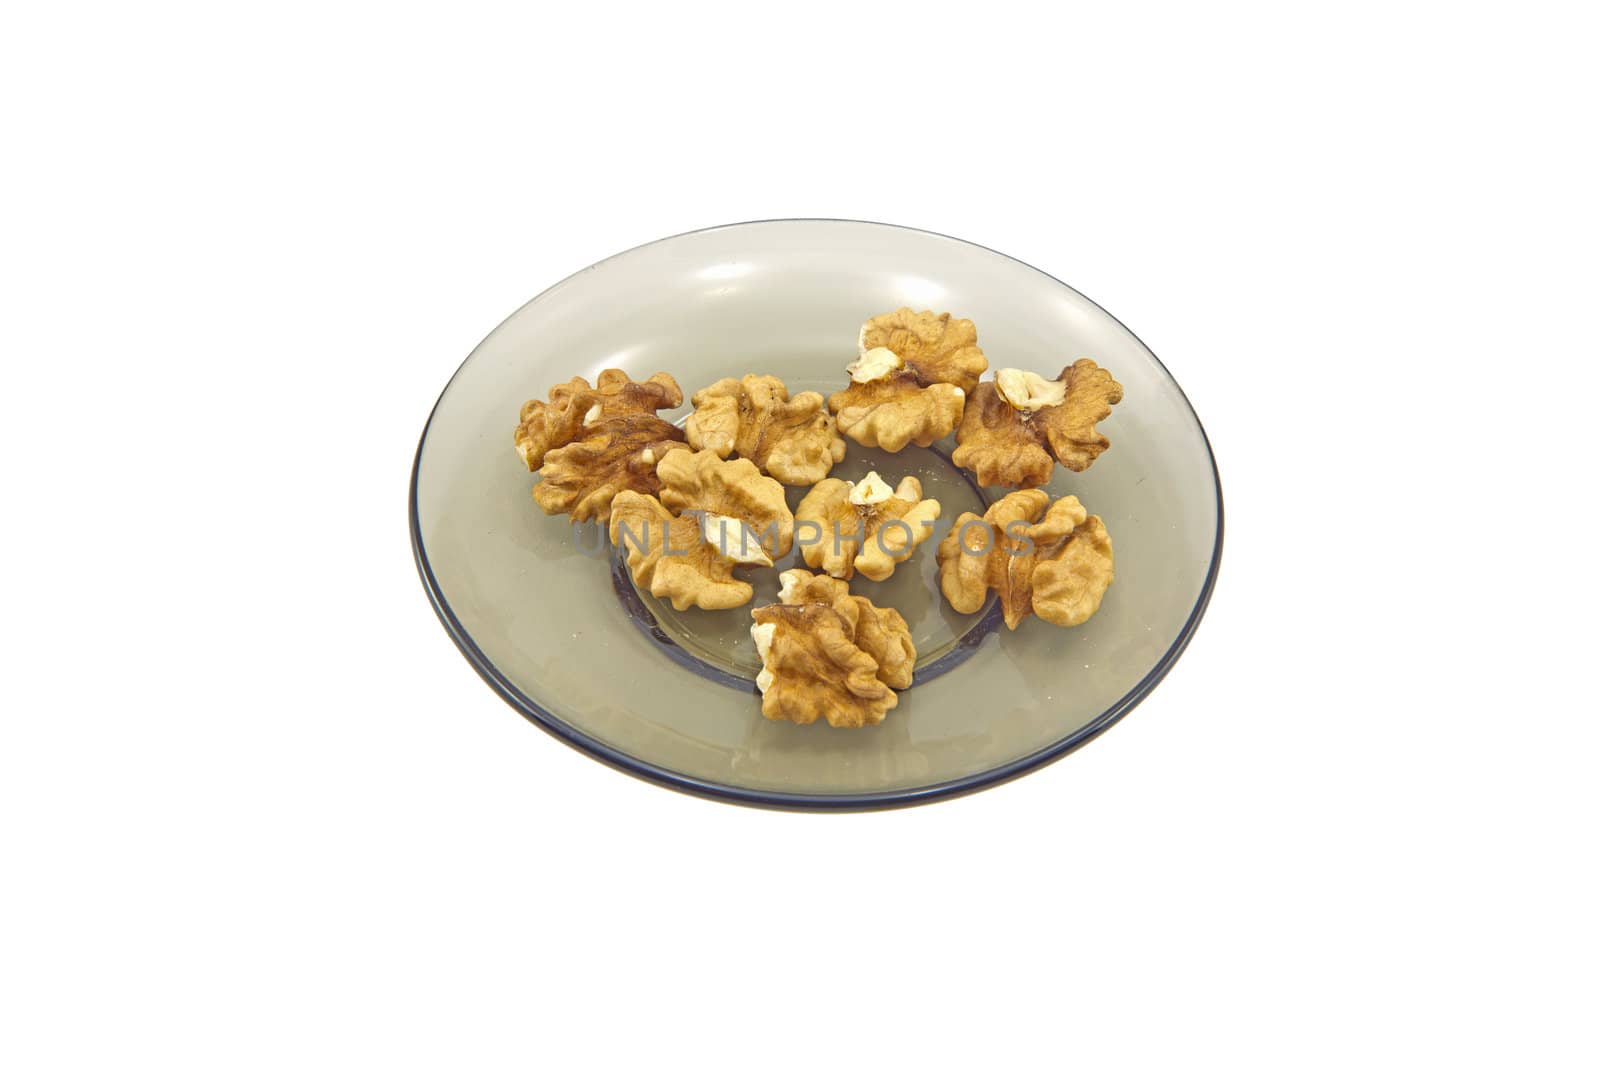 Some walnuts on a glass plate isolated on a white background